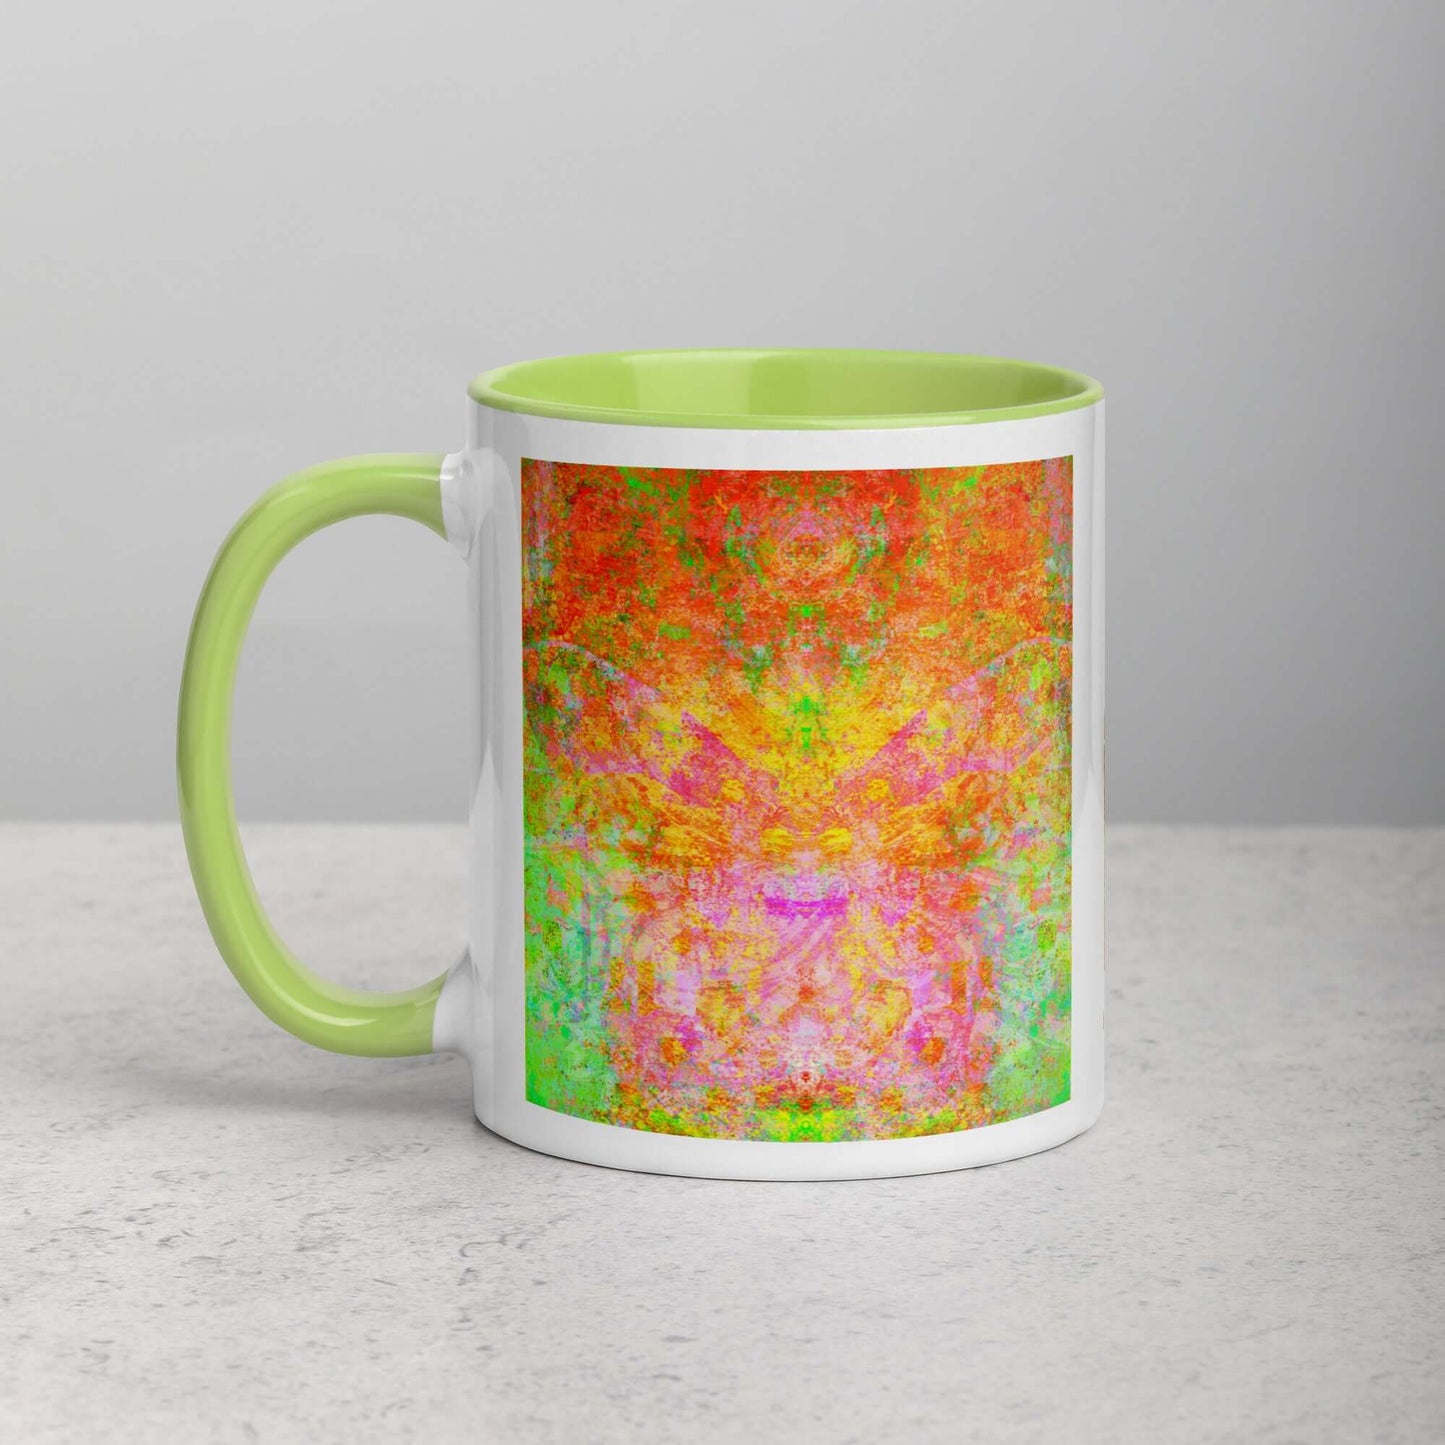 Green and Orange Butterfly Shaped “Firefly” Abstract Art Mug with Lime Green Color Inside Left Handed Front View